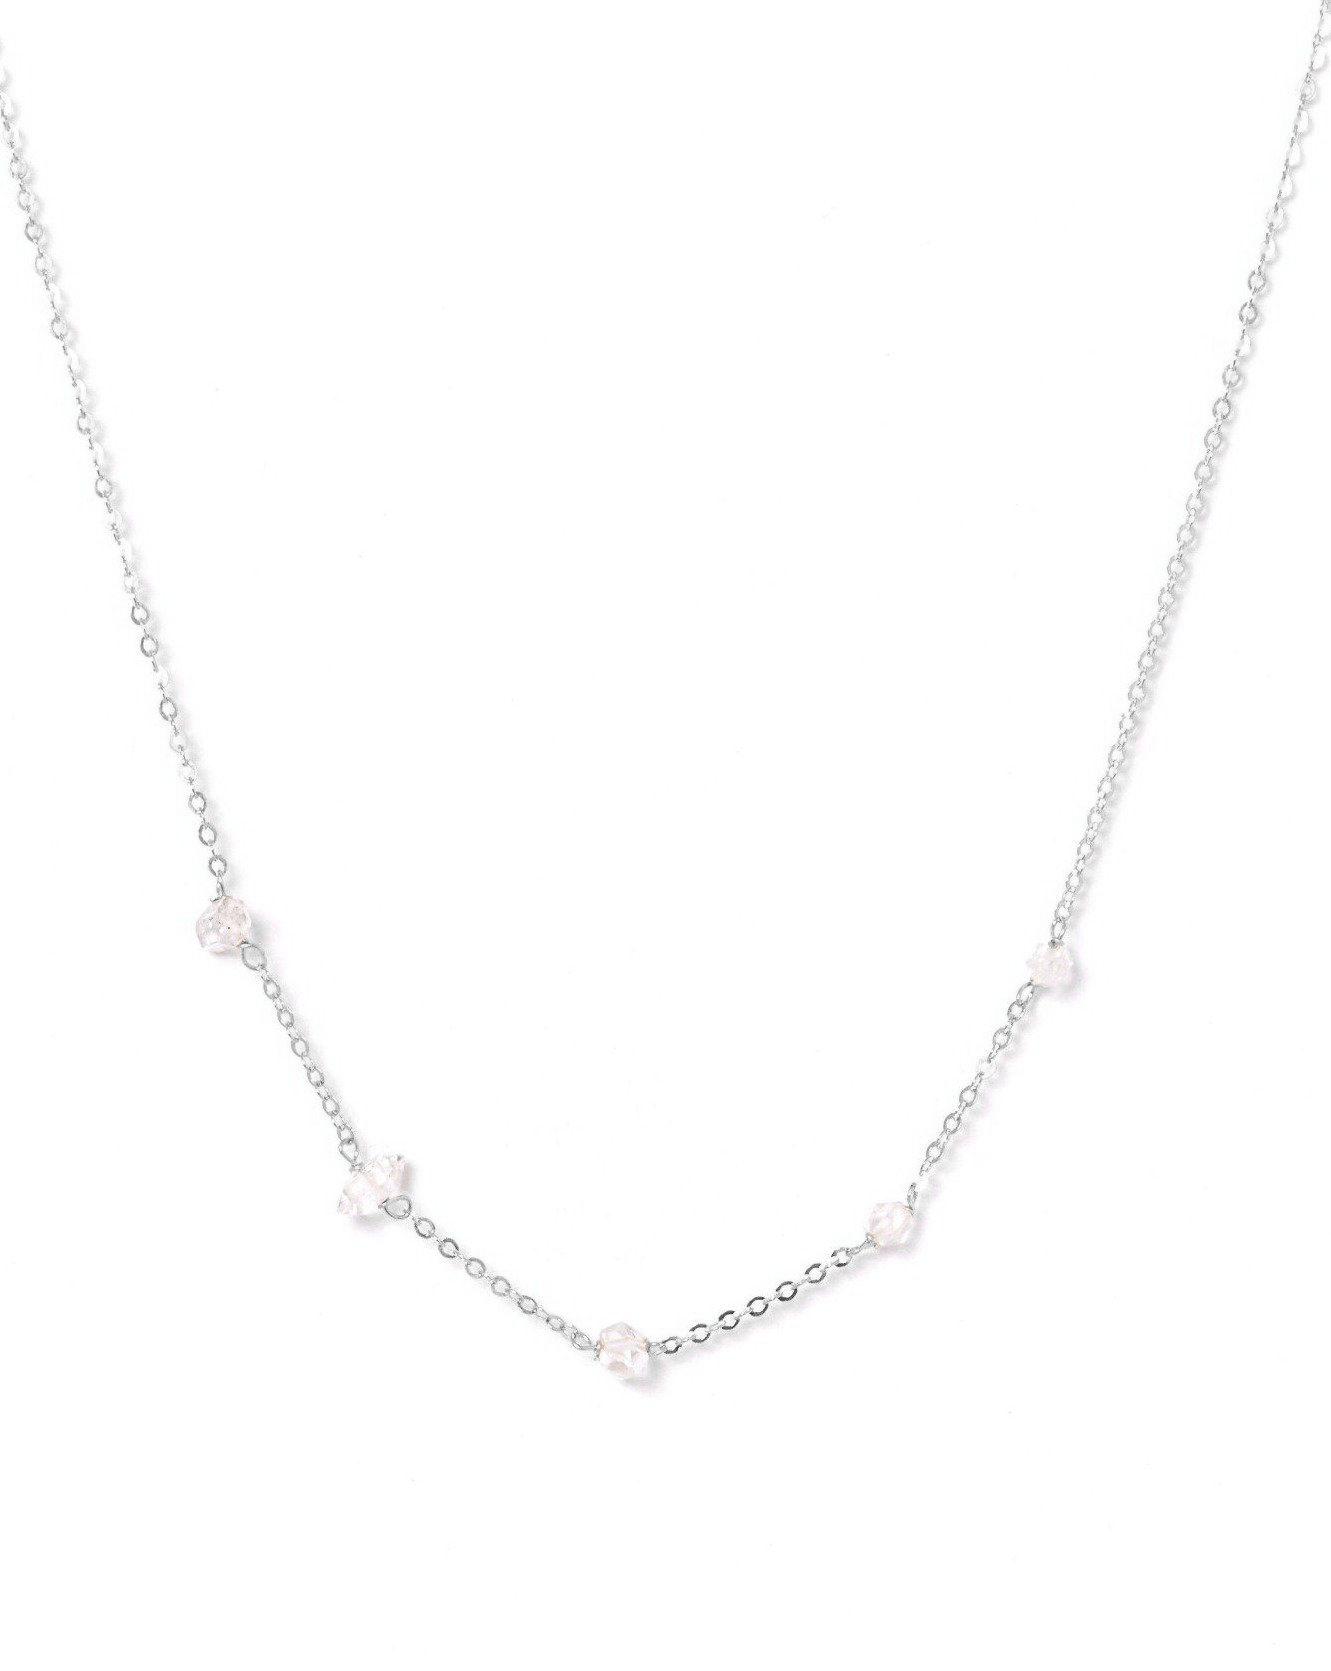 Cinq Herkimer Necklace by KOZAKH. A 16 inch long necklace in Sterling Silver, featuring Herkimer Diamonds.